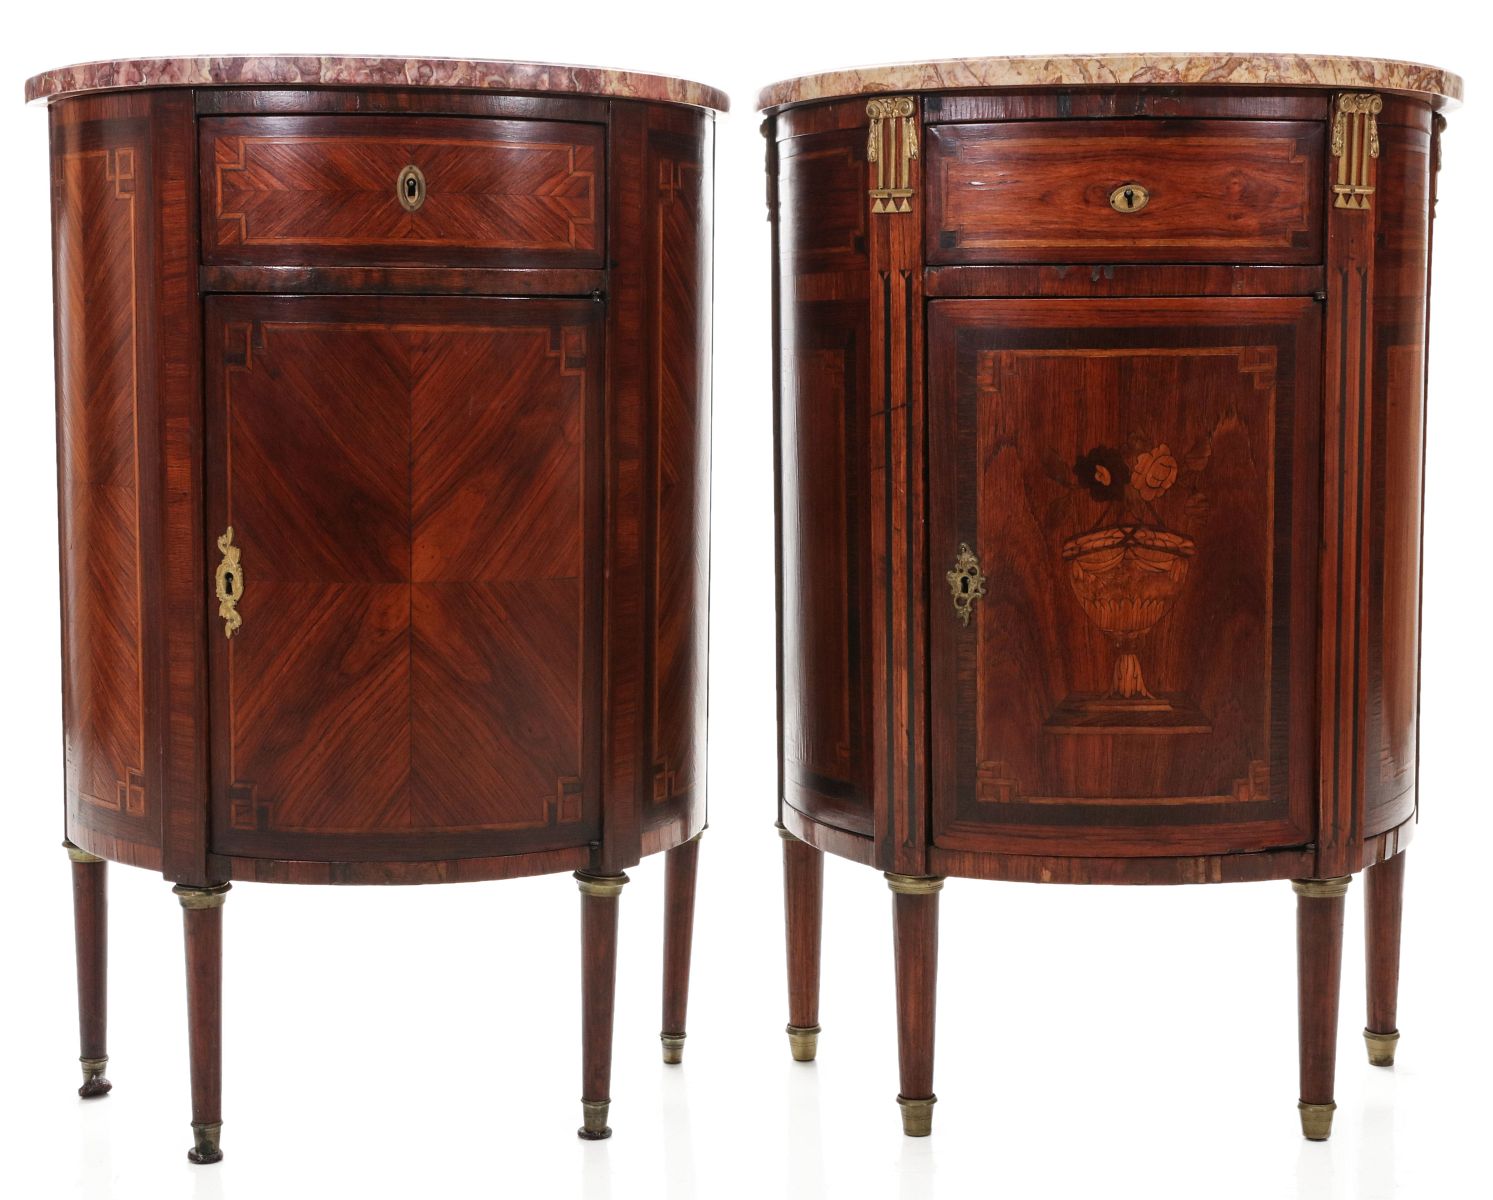 TWO SIMILAR EARLY 20TH CENT DEMI-LUNE FRENCH CABINETS